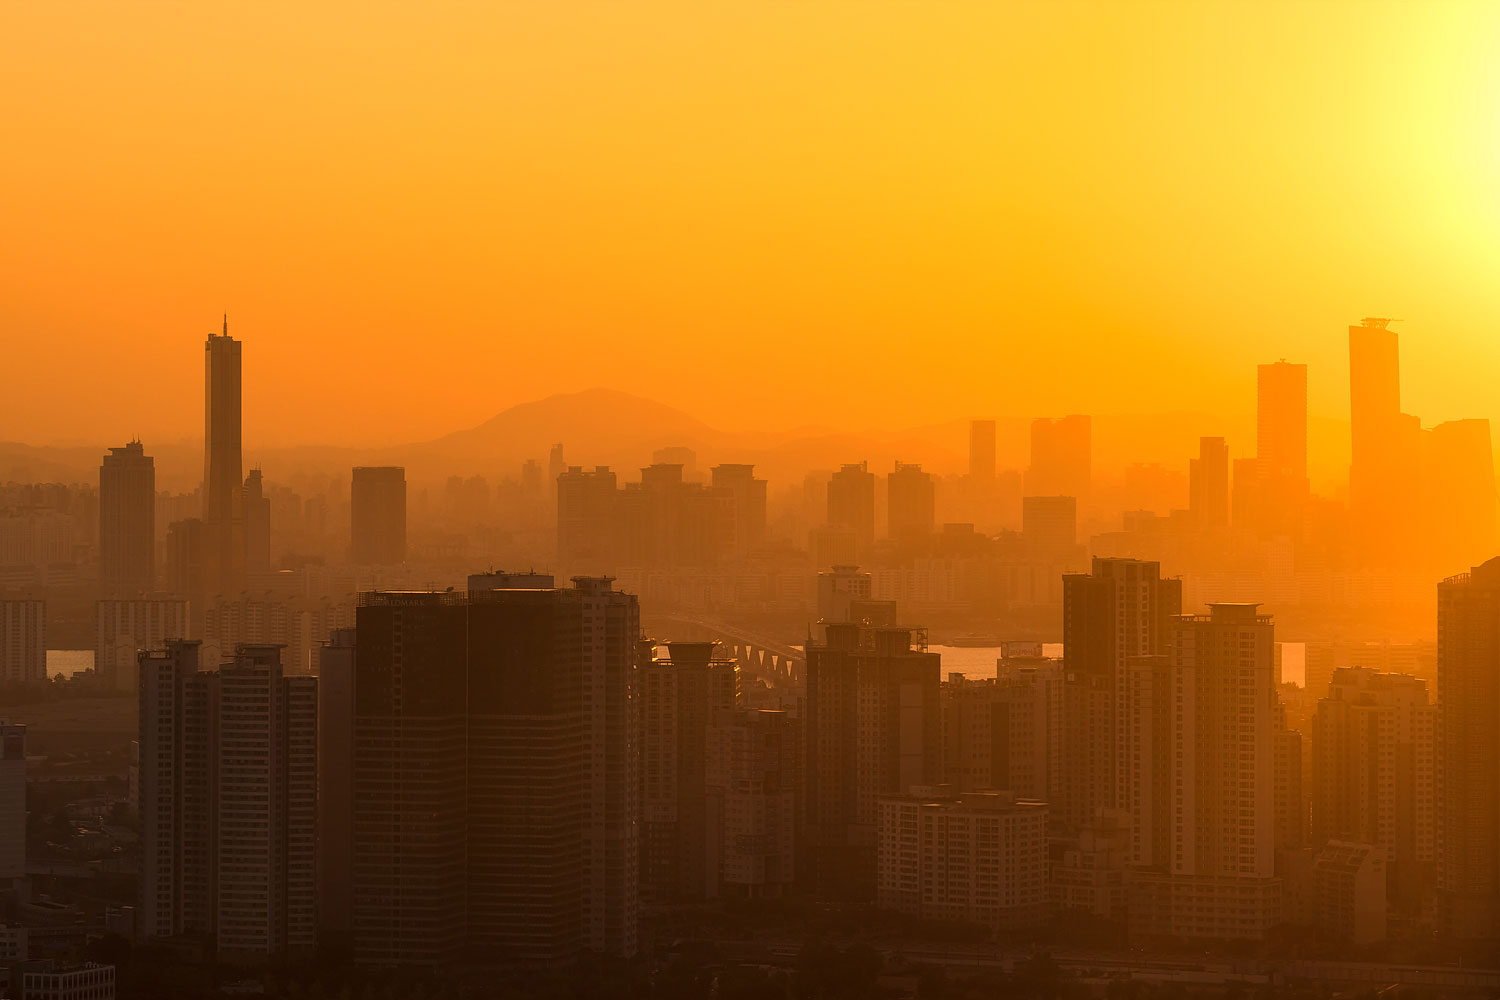 Sunset over Seoul, South Korea. View from Central Seoul towards Yeouido.